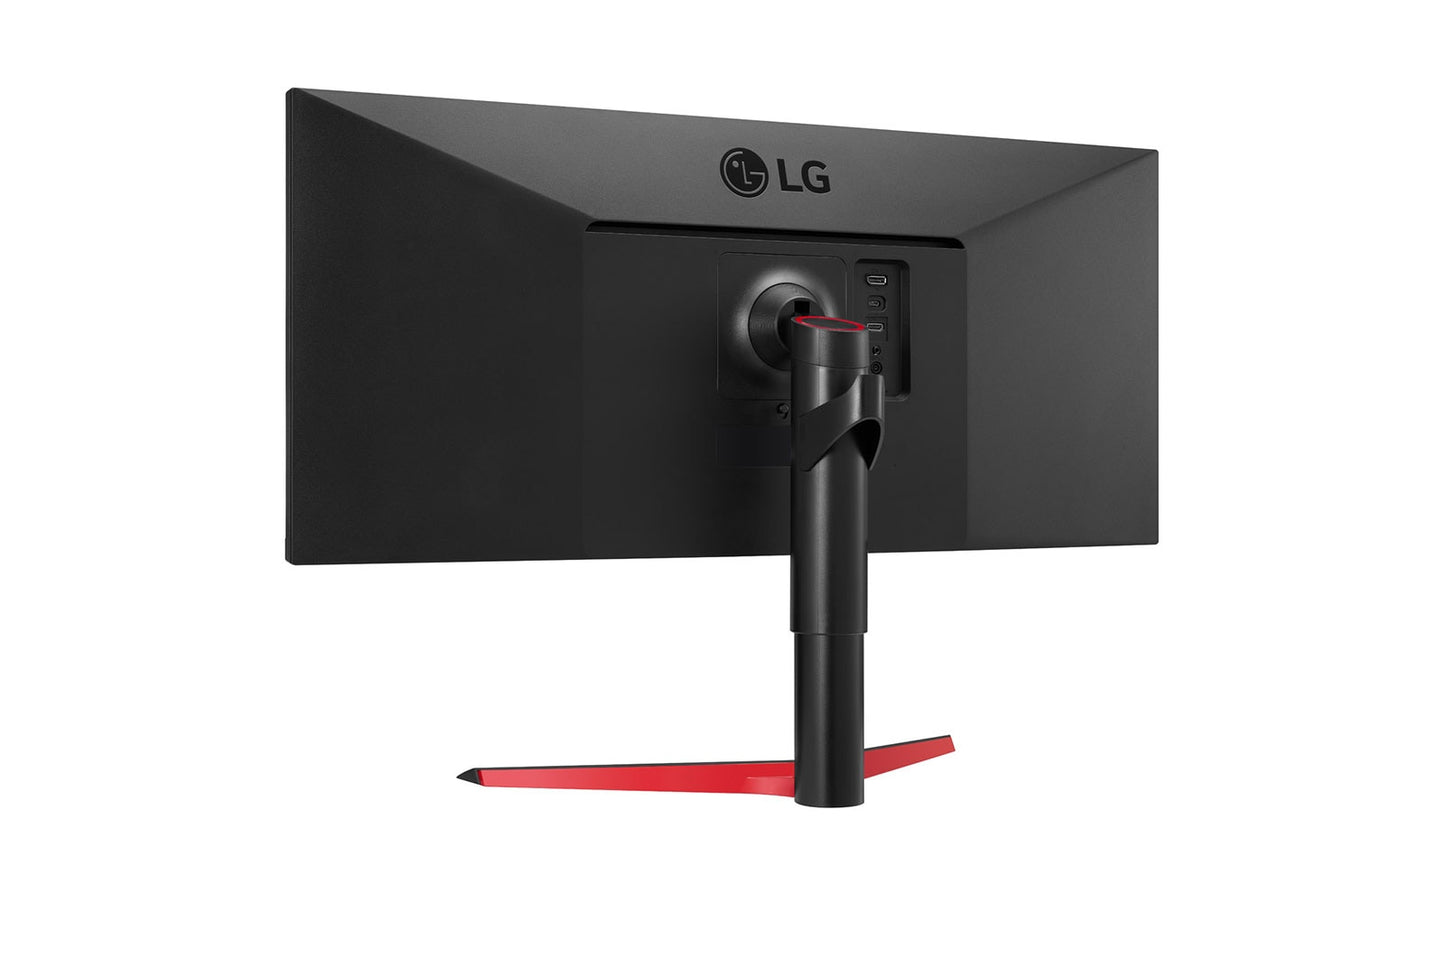 LG 34WP65G-B 34" Ultra-Wide Fhd Gaming Monitor (Brand New)